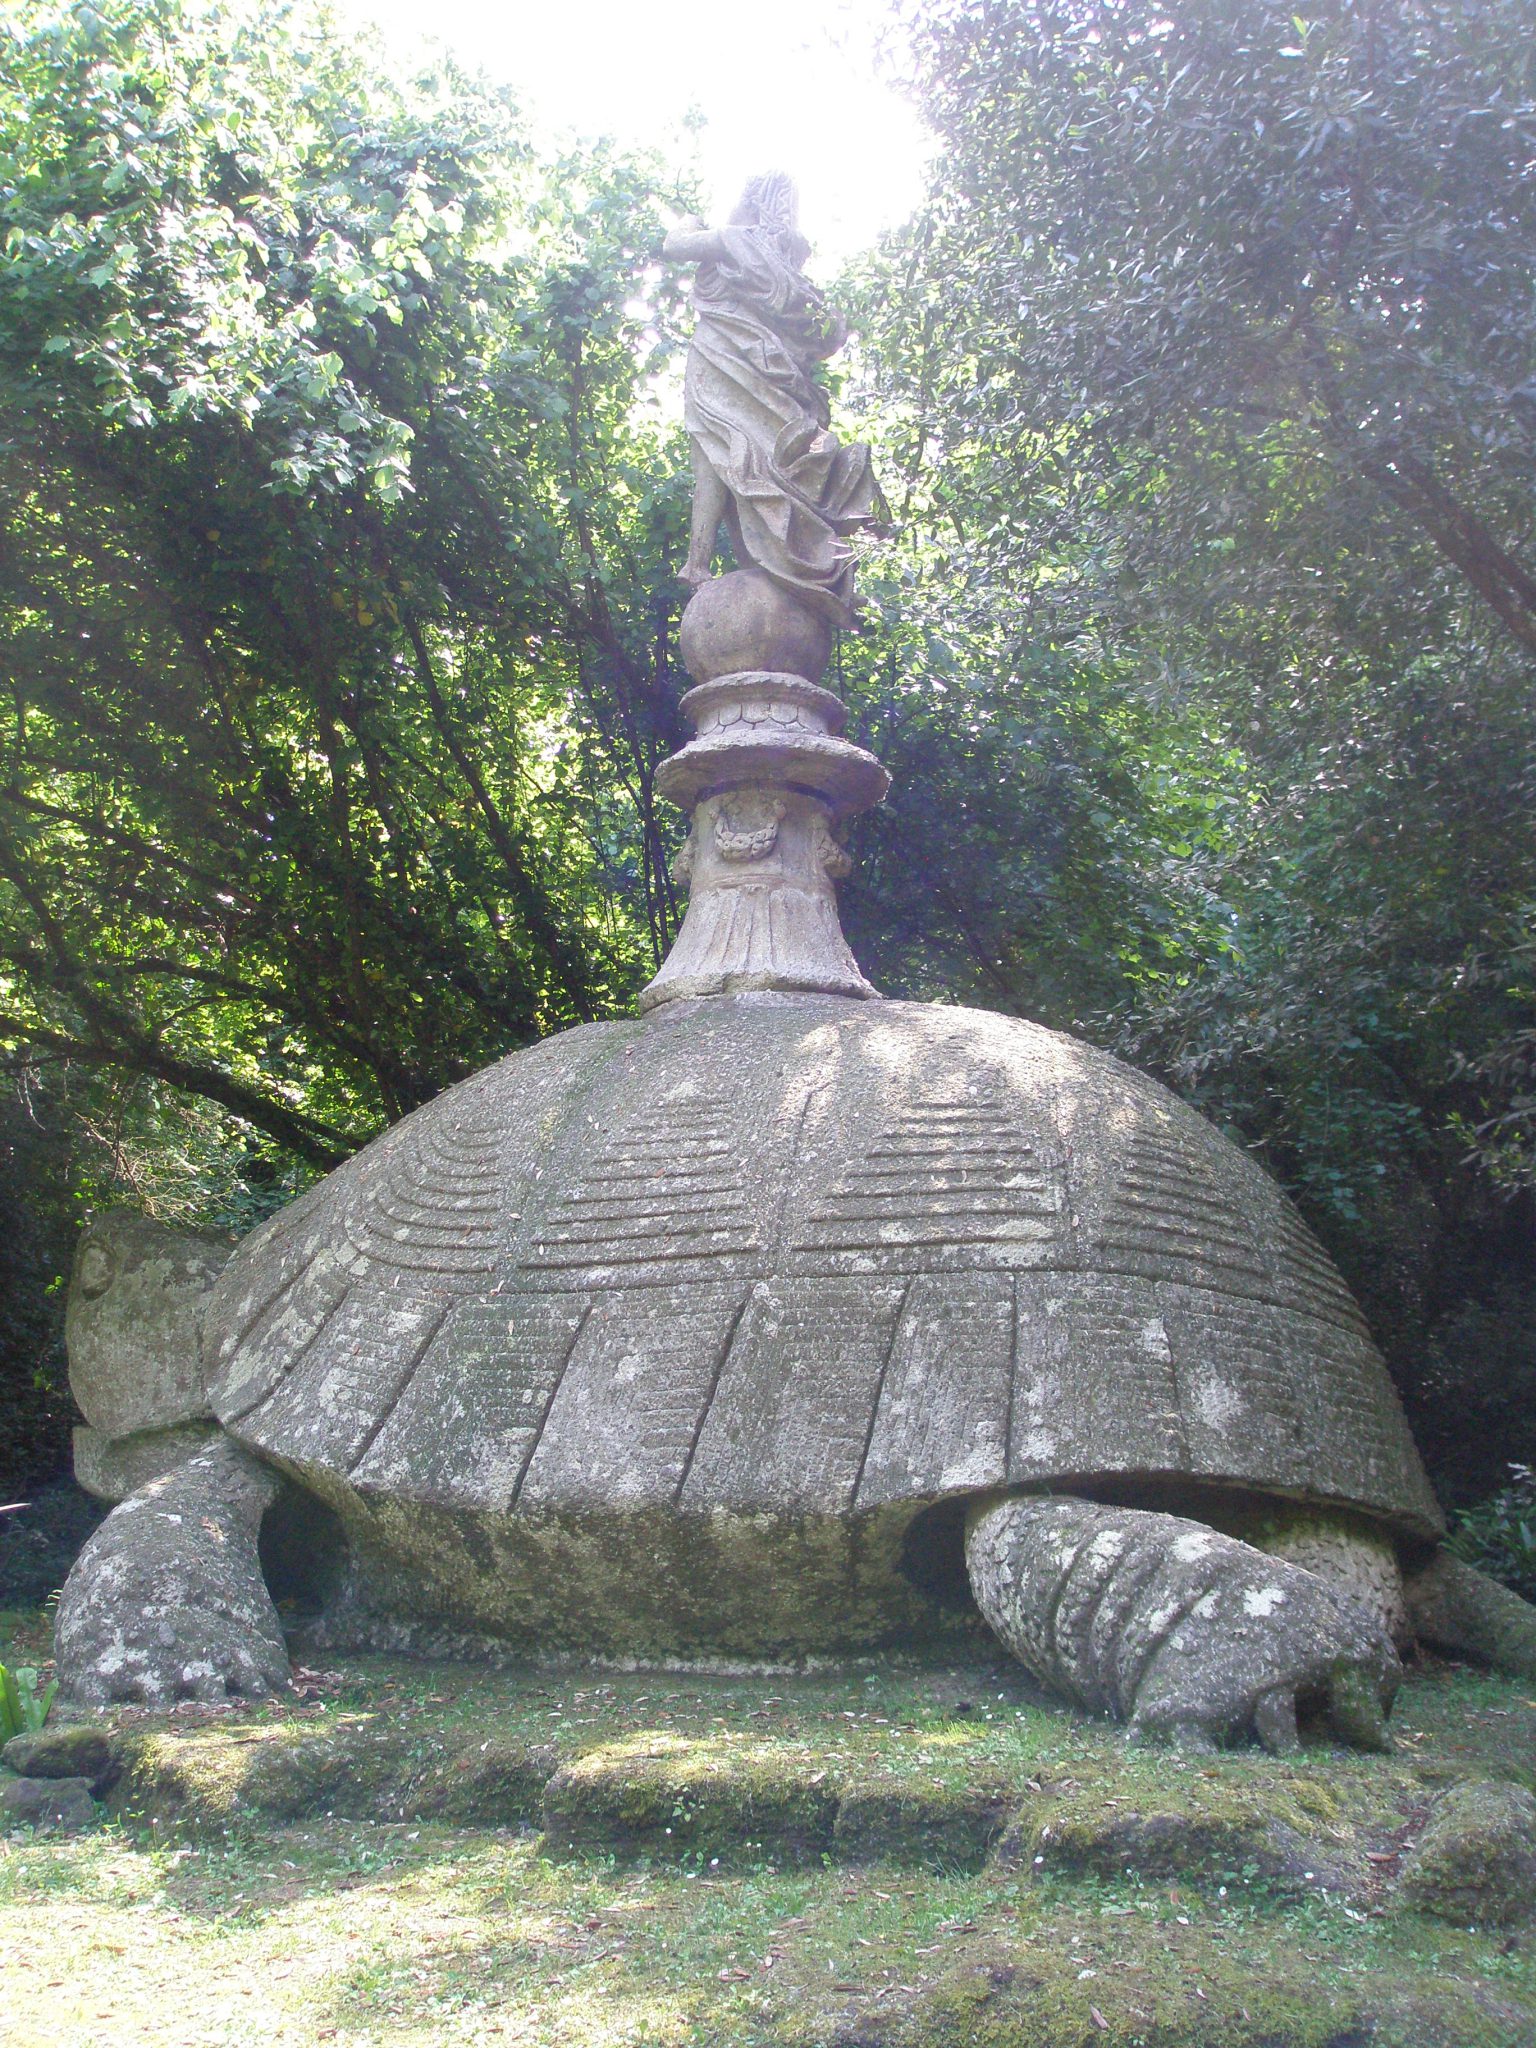 Tortoise carrying Fame